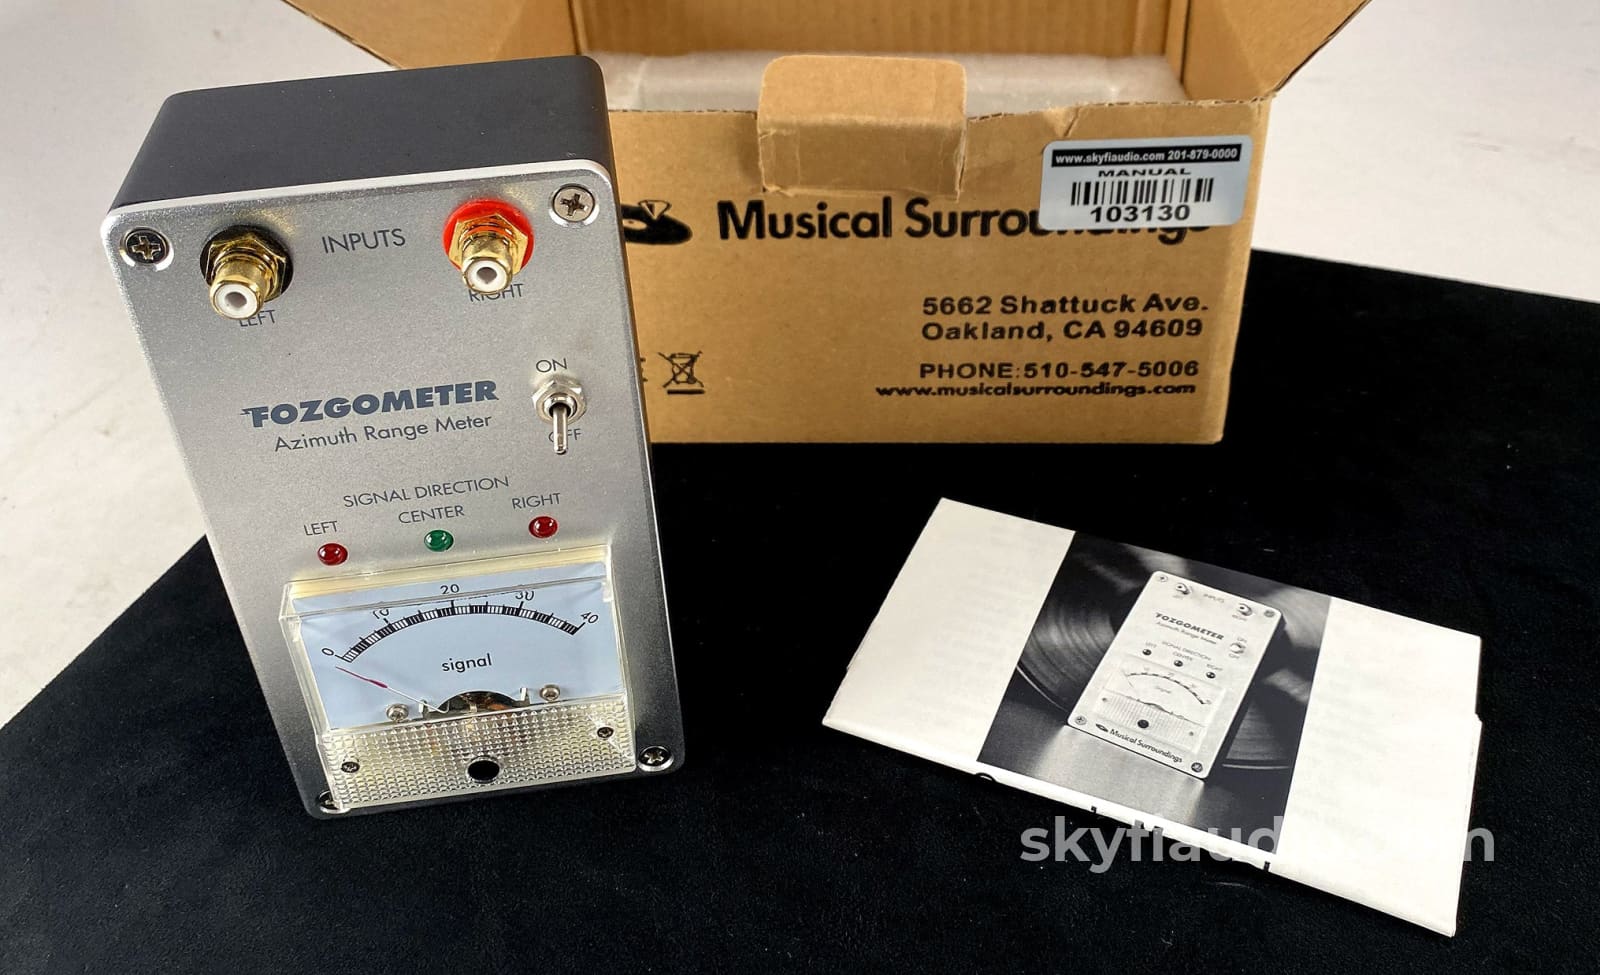 Fosgate Fozgometer Azimuth Range Meter - A Must To Setup Your Phono Cartridge Accessory